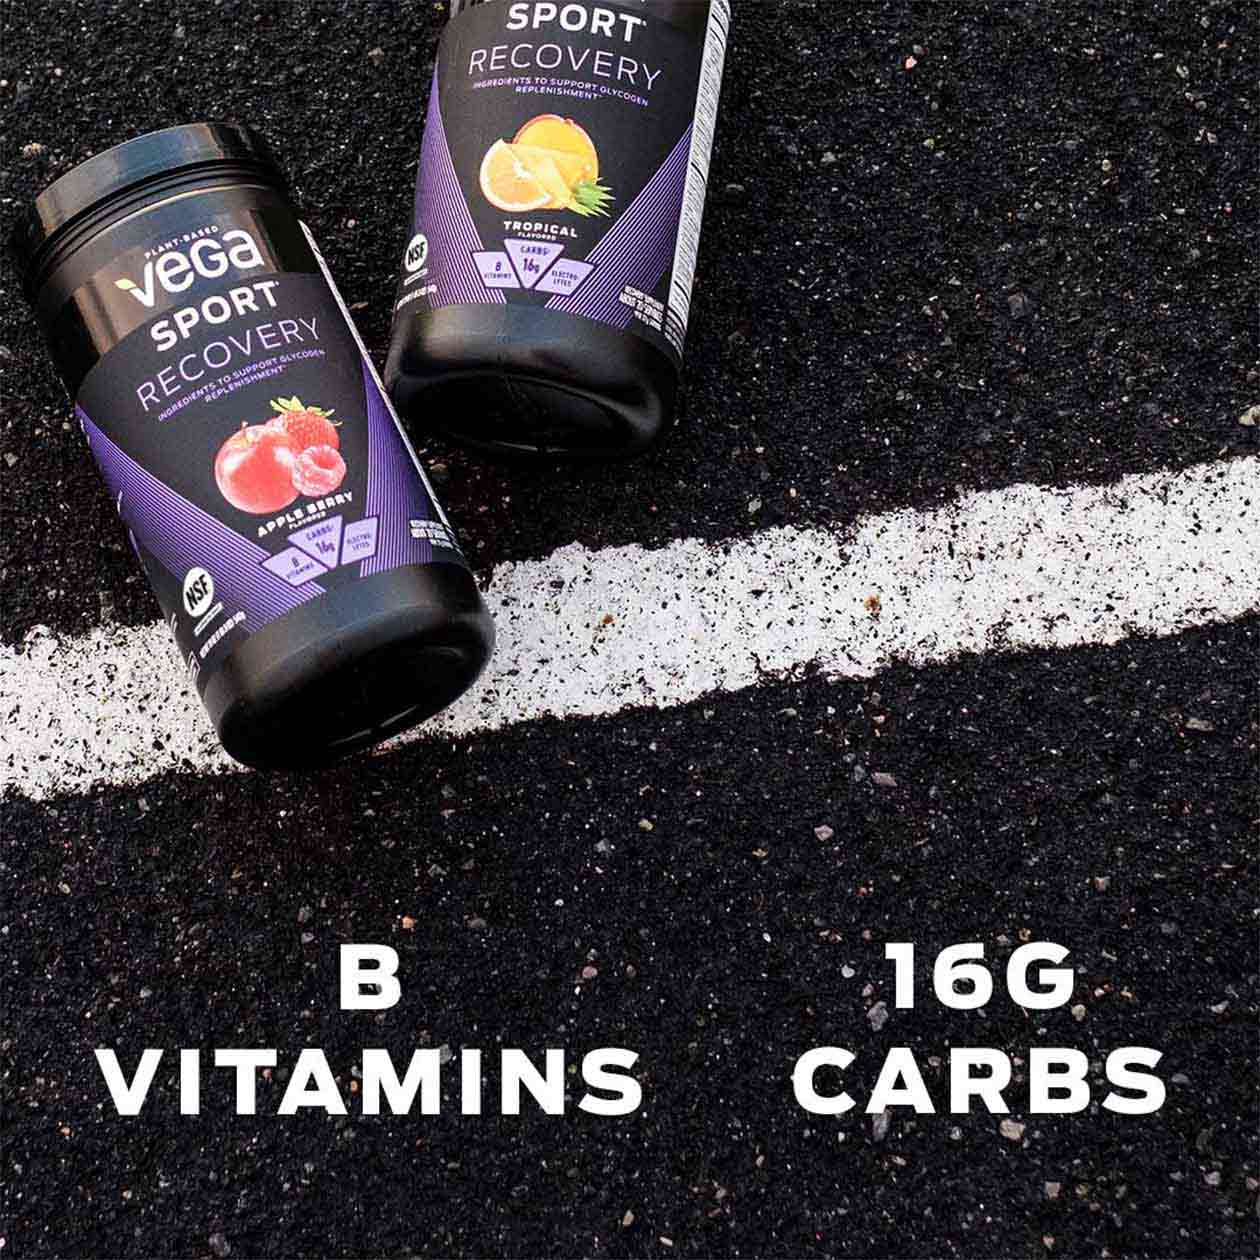 Vega Sport® Recovery - Plant-Based Workout Recovery